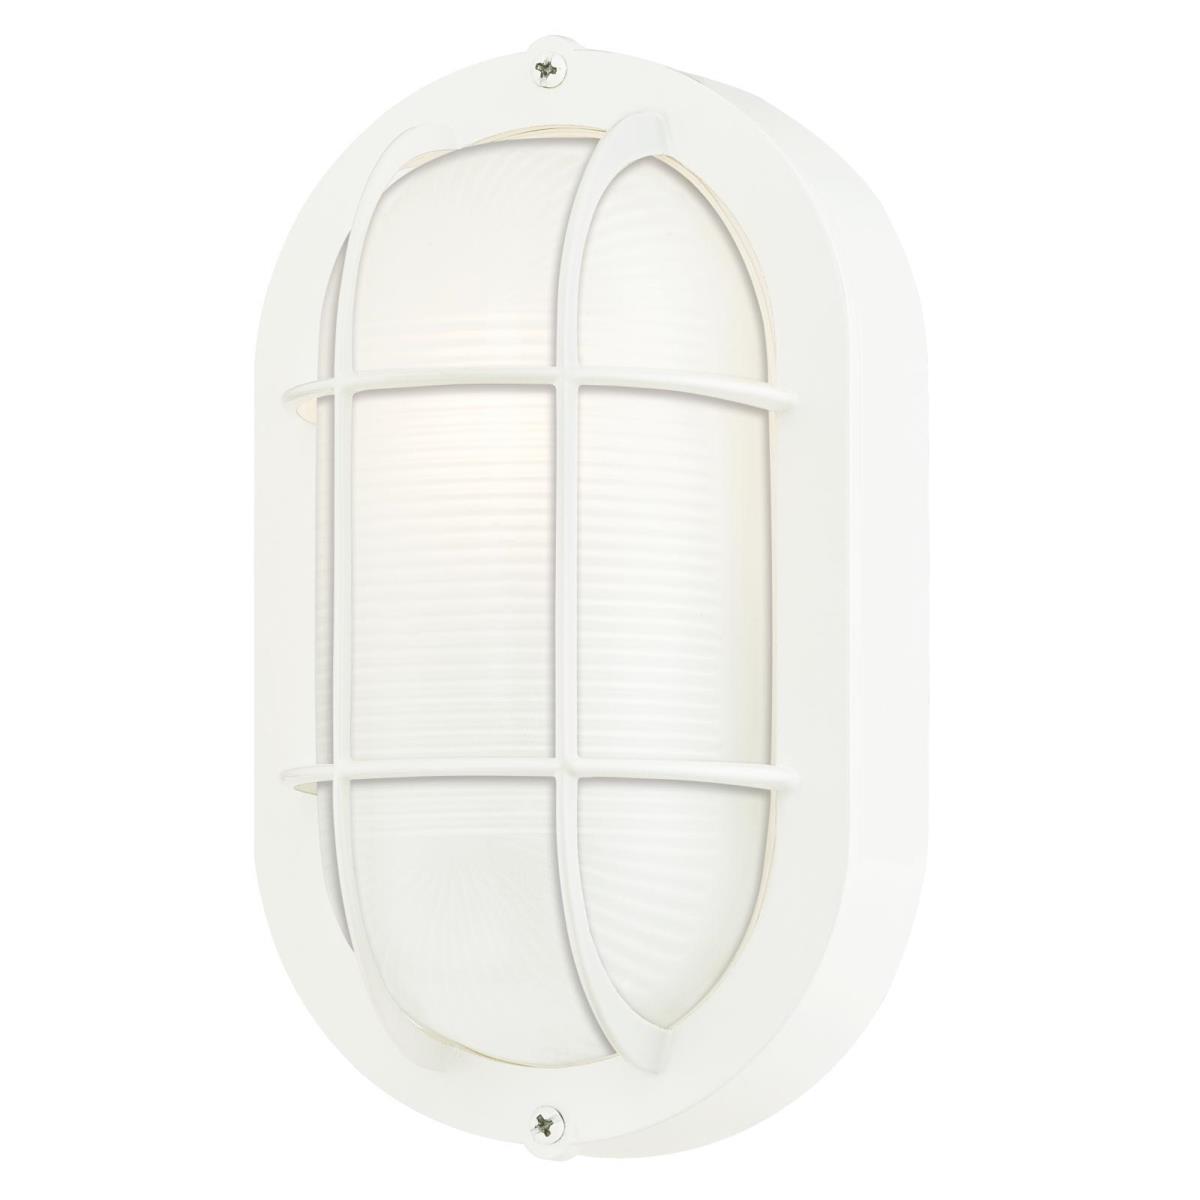 1 Light Wall Fixture White Finish with White Glass Lens